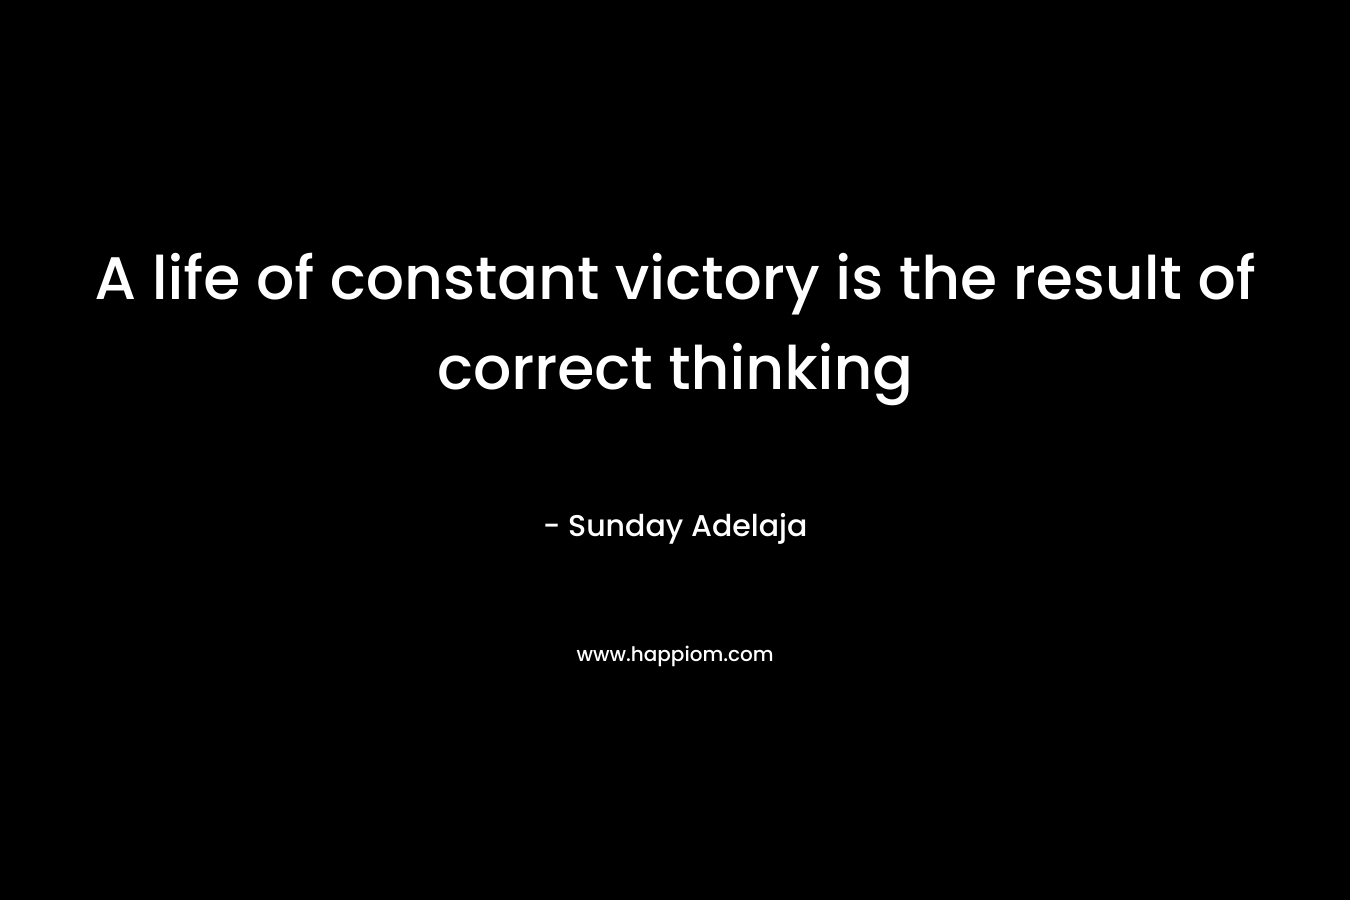 A life of constant victory is the result of correct thinking